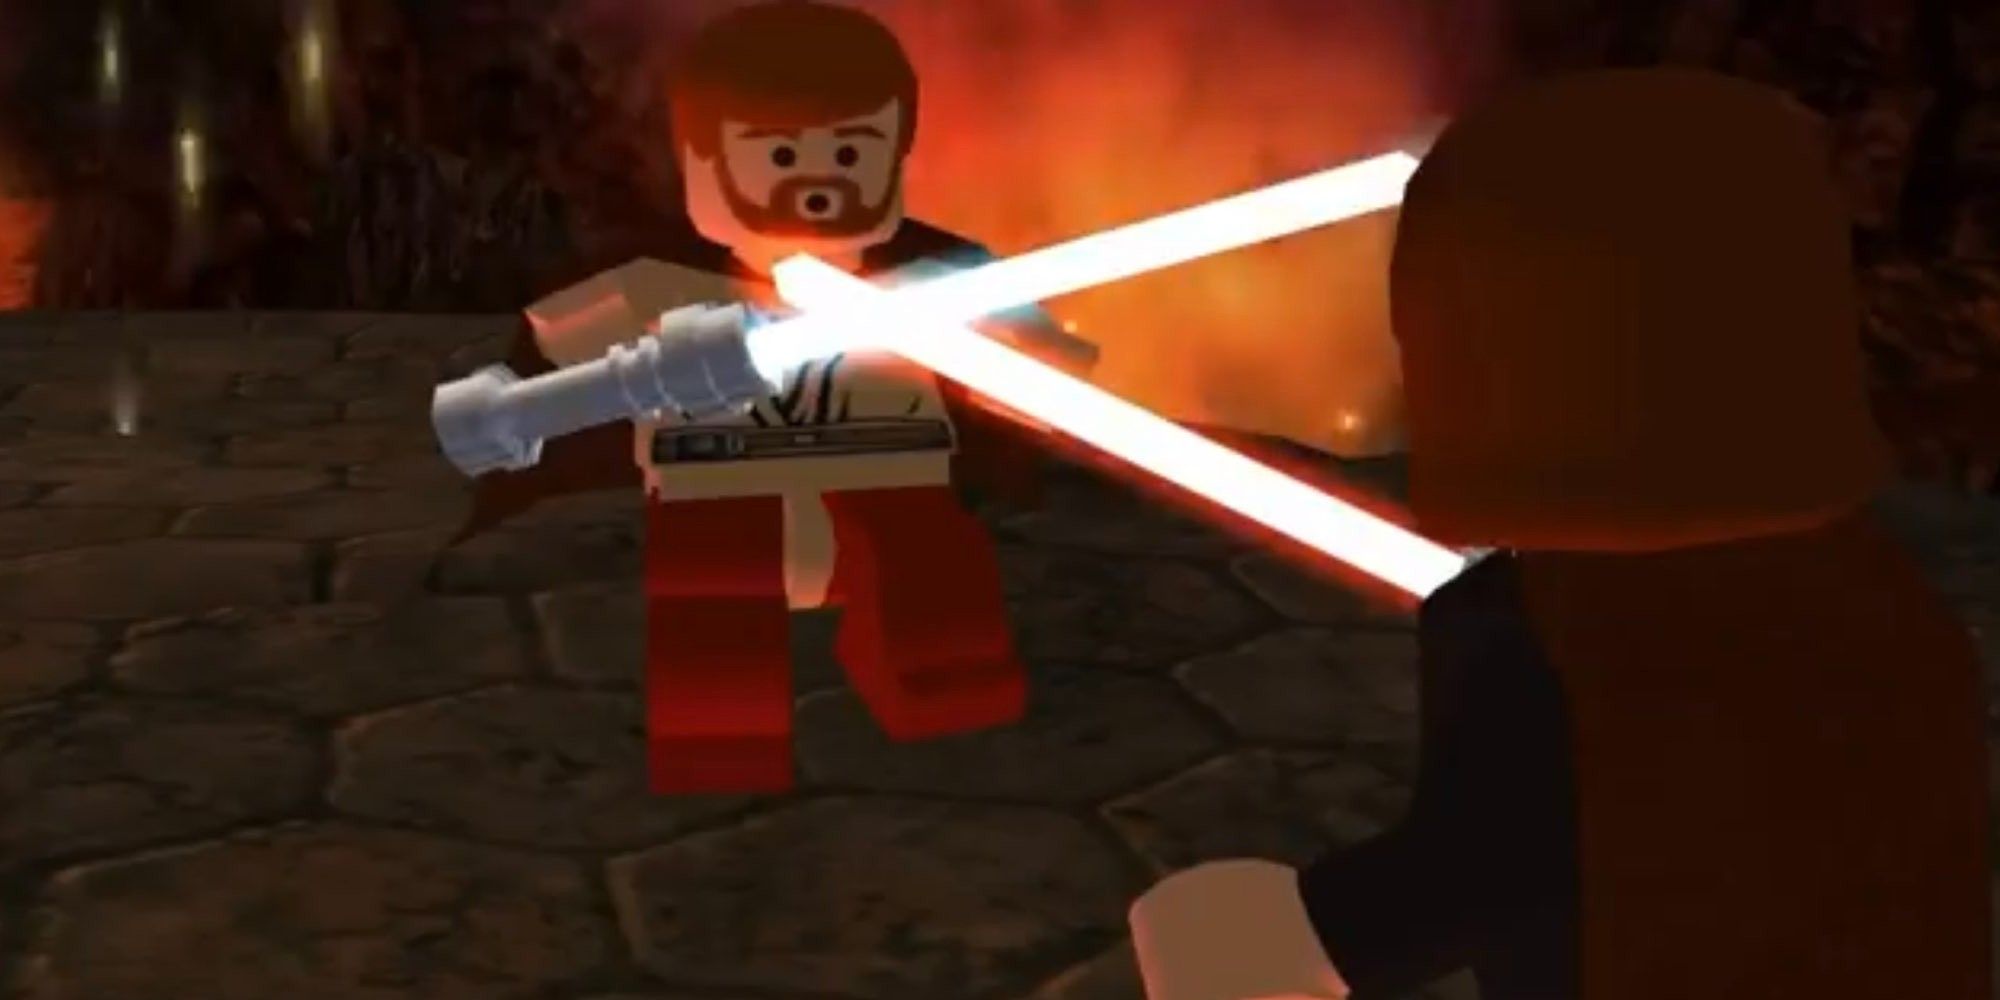 Star Wars Revenge Of The Sith Spoiled In Games